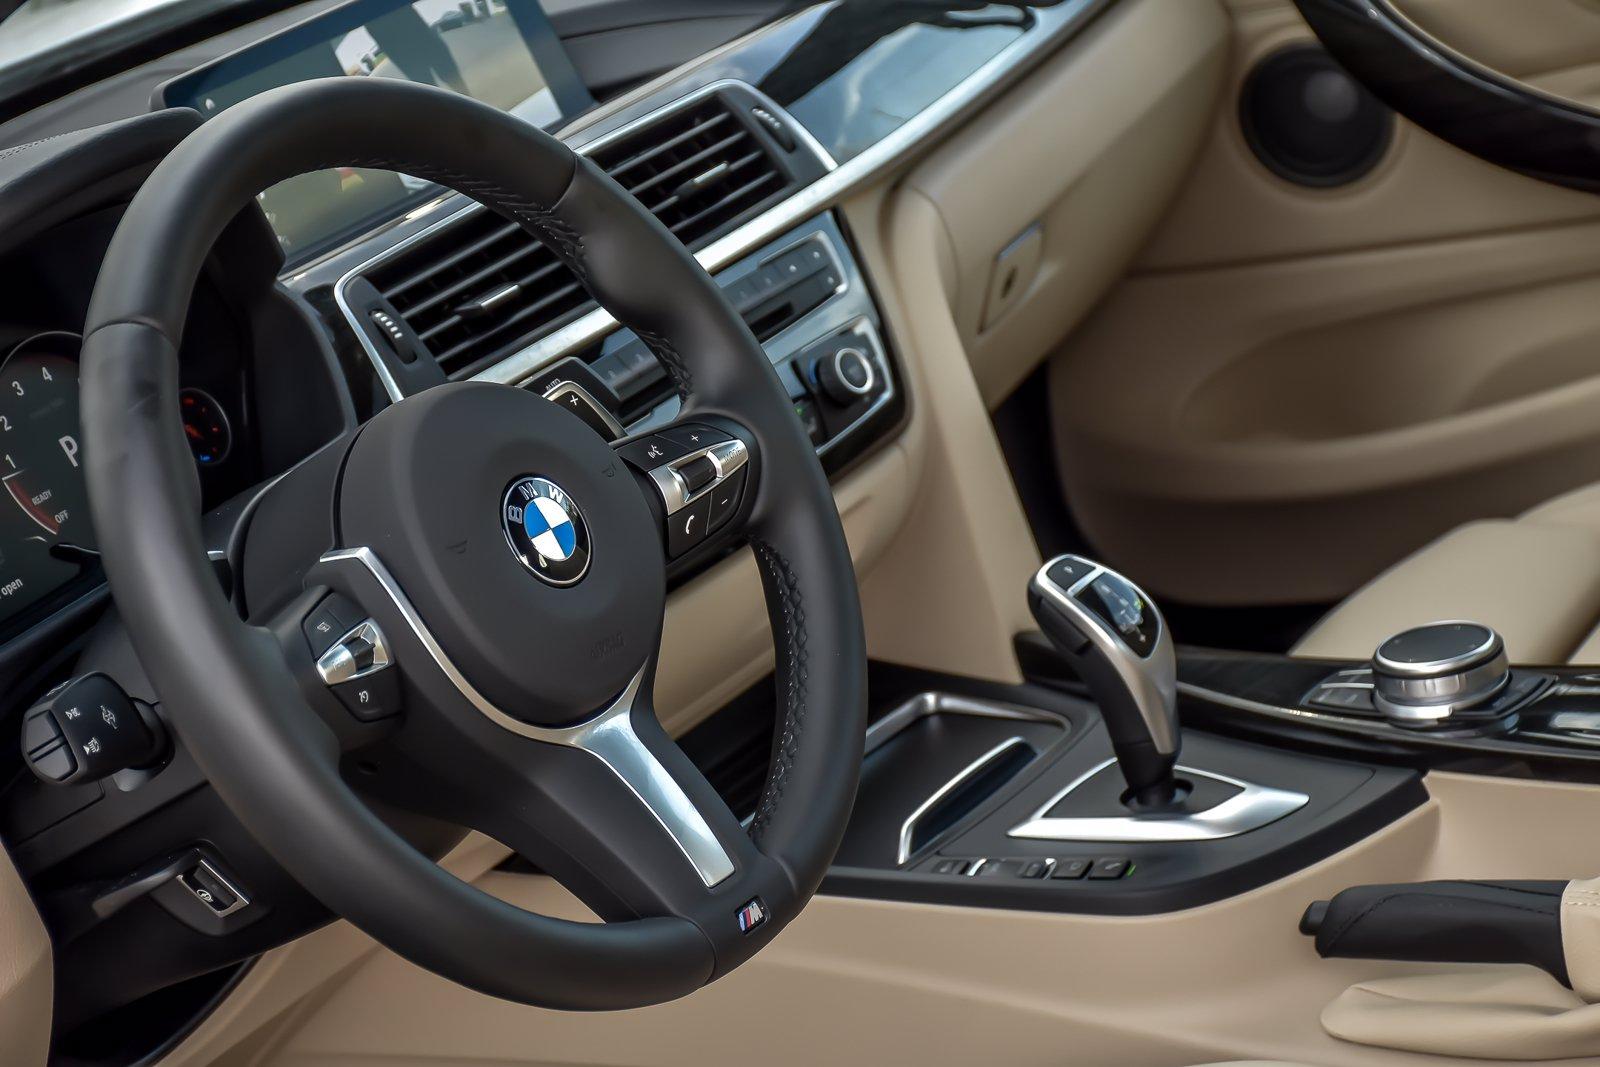 BMW - VENETIAN BEIGE - Leather Seat Color TOUCH UP KITS - BMW Code